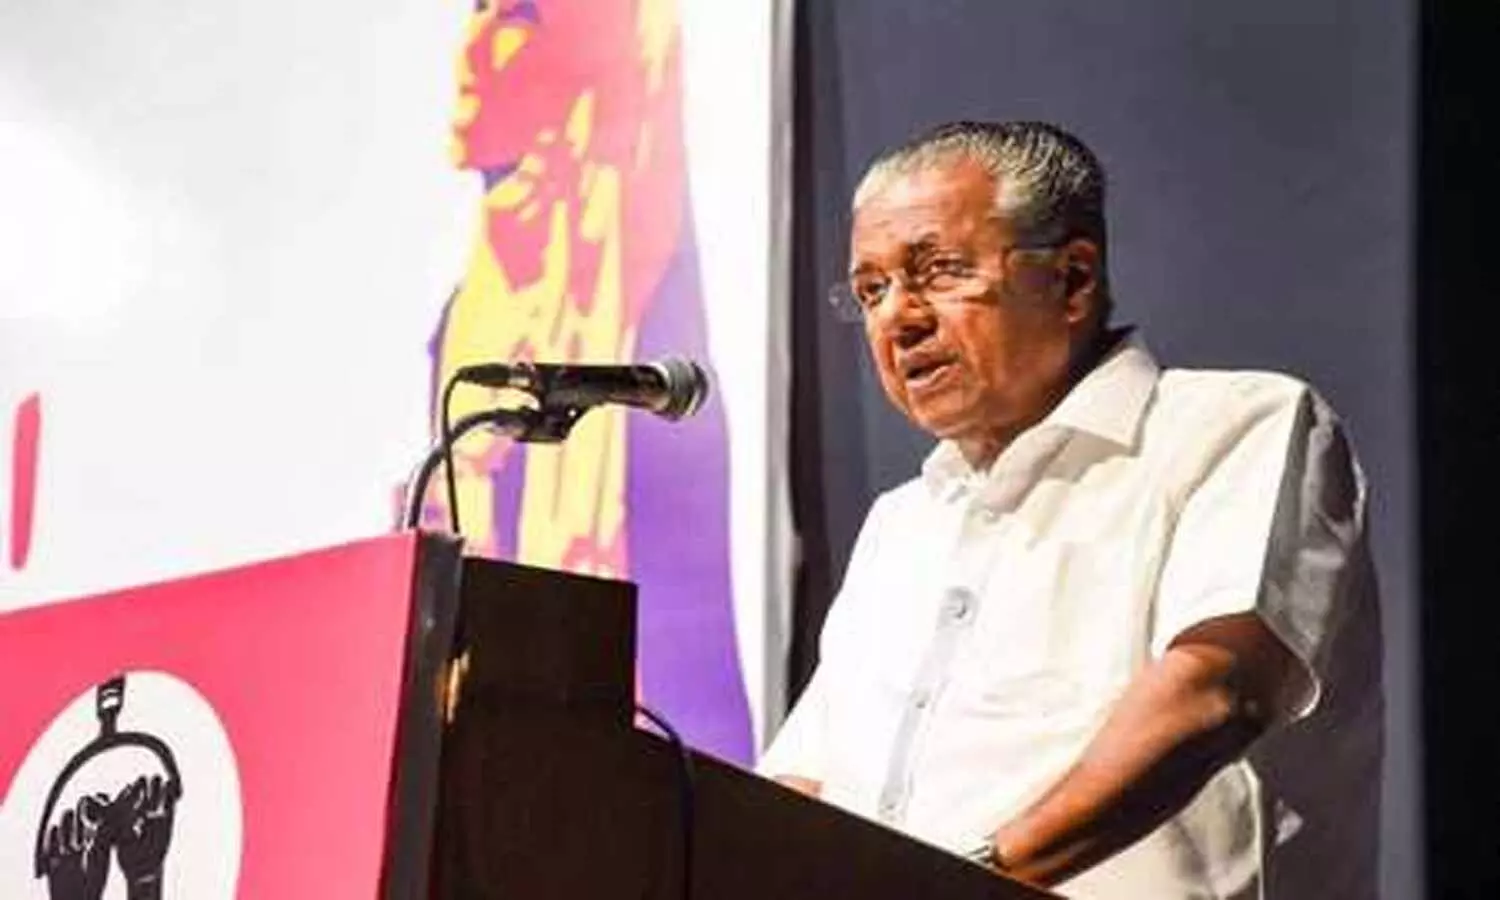 No free treatment for unvaccinated COVID patients: Kerala CM